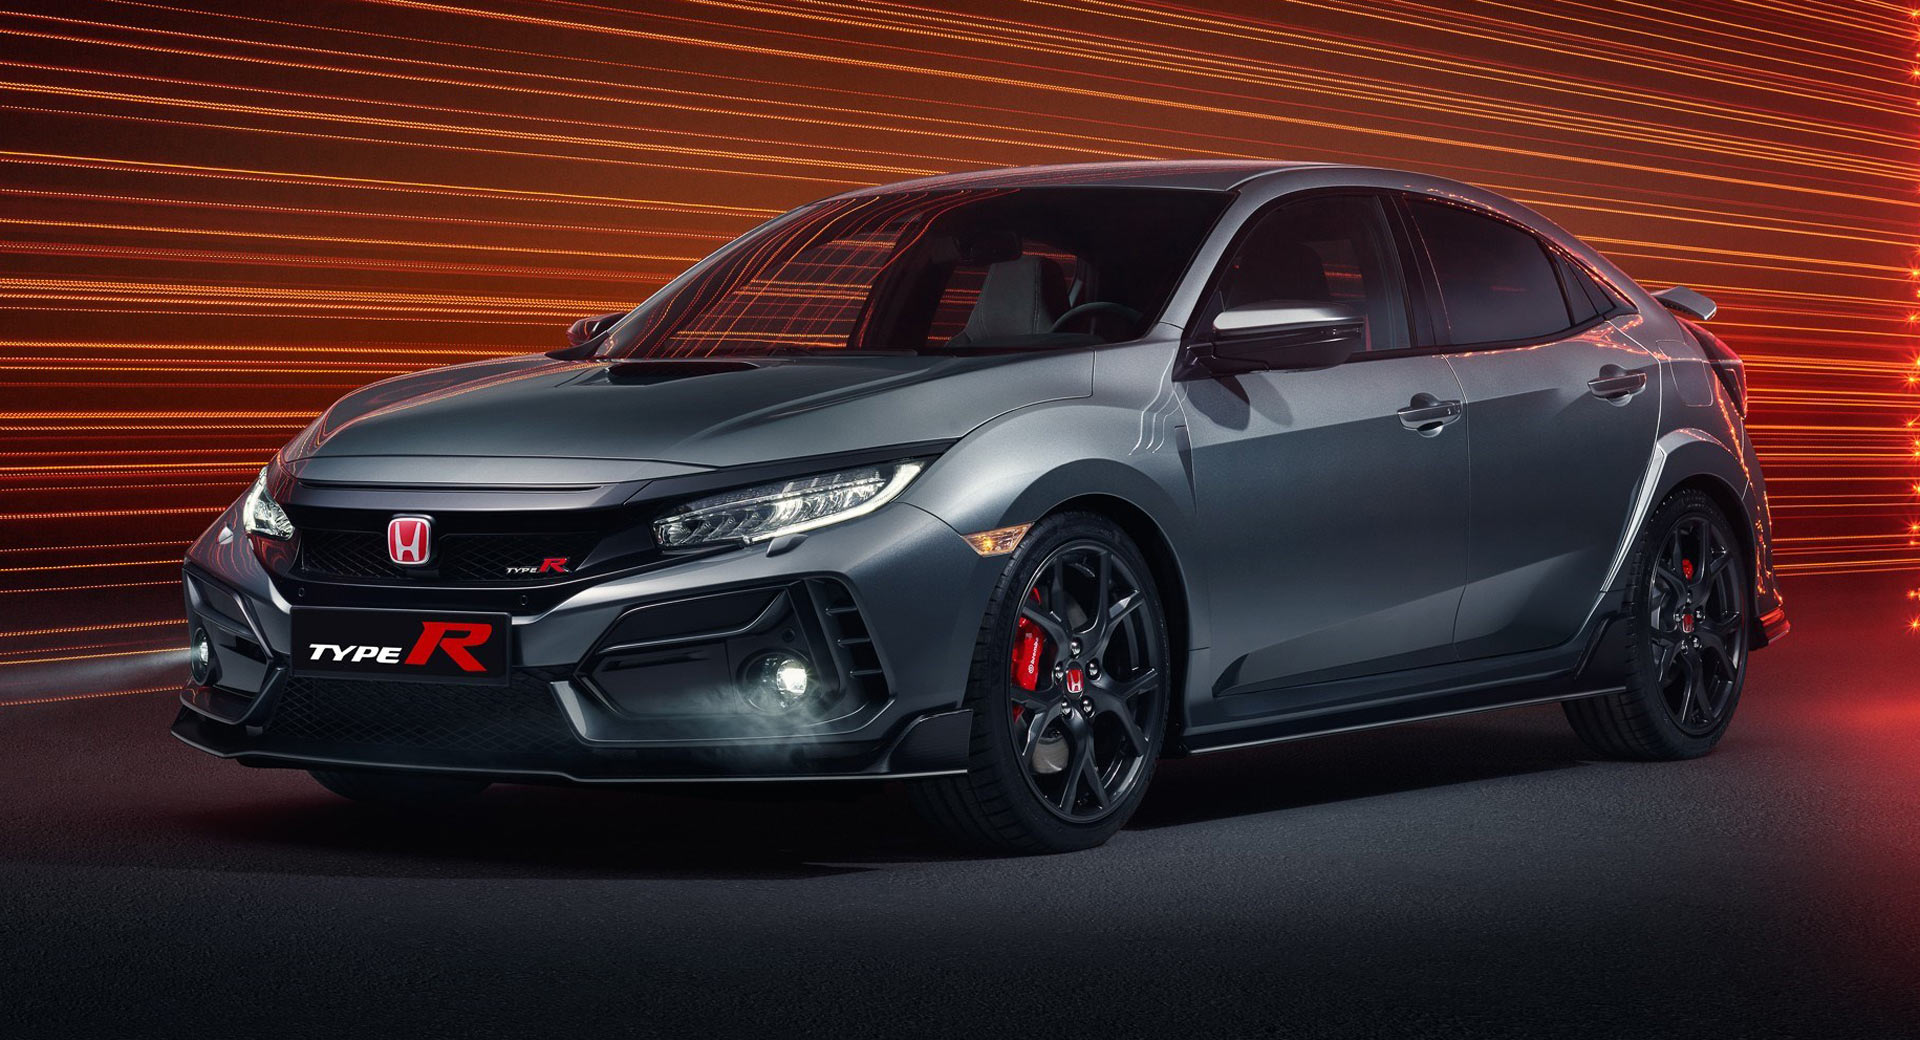 Find Honda S 2020 Civic Type R Over The Top Enter The Sport Line That Tames The Edgy Styling Carscoops